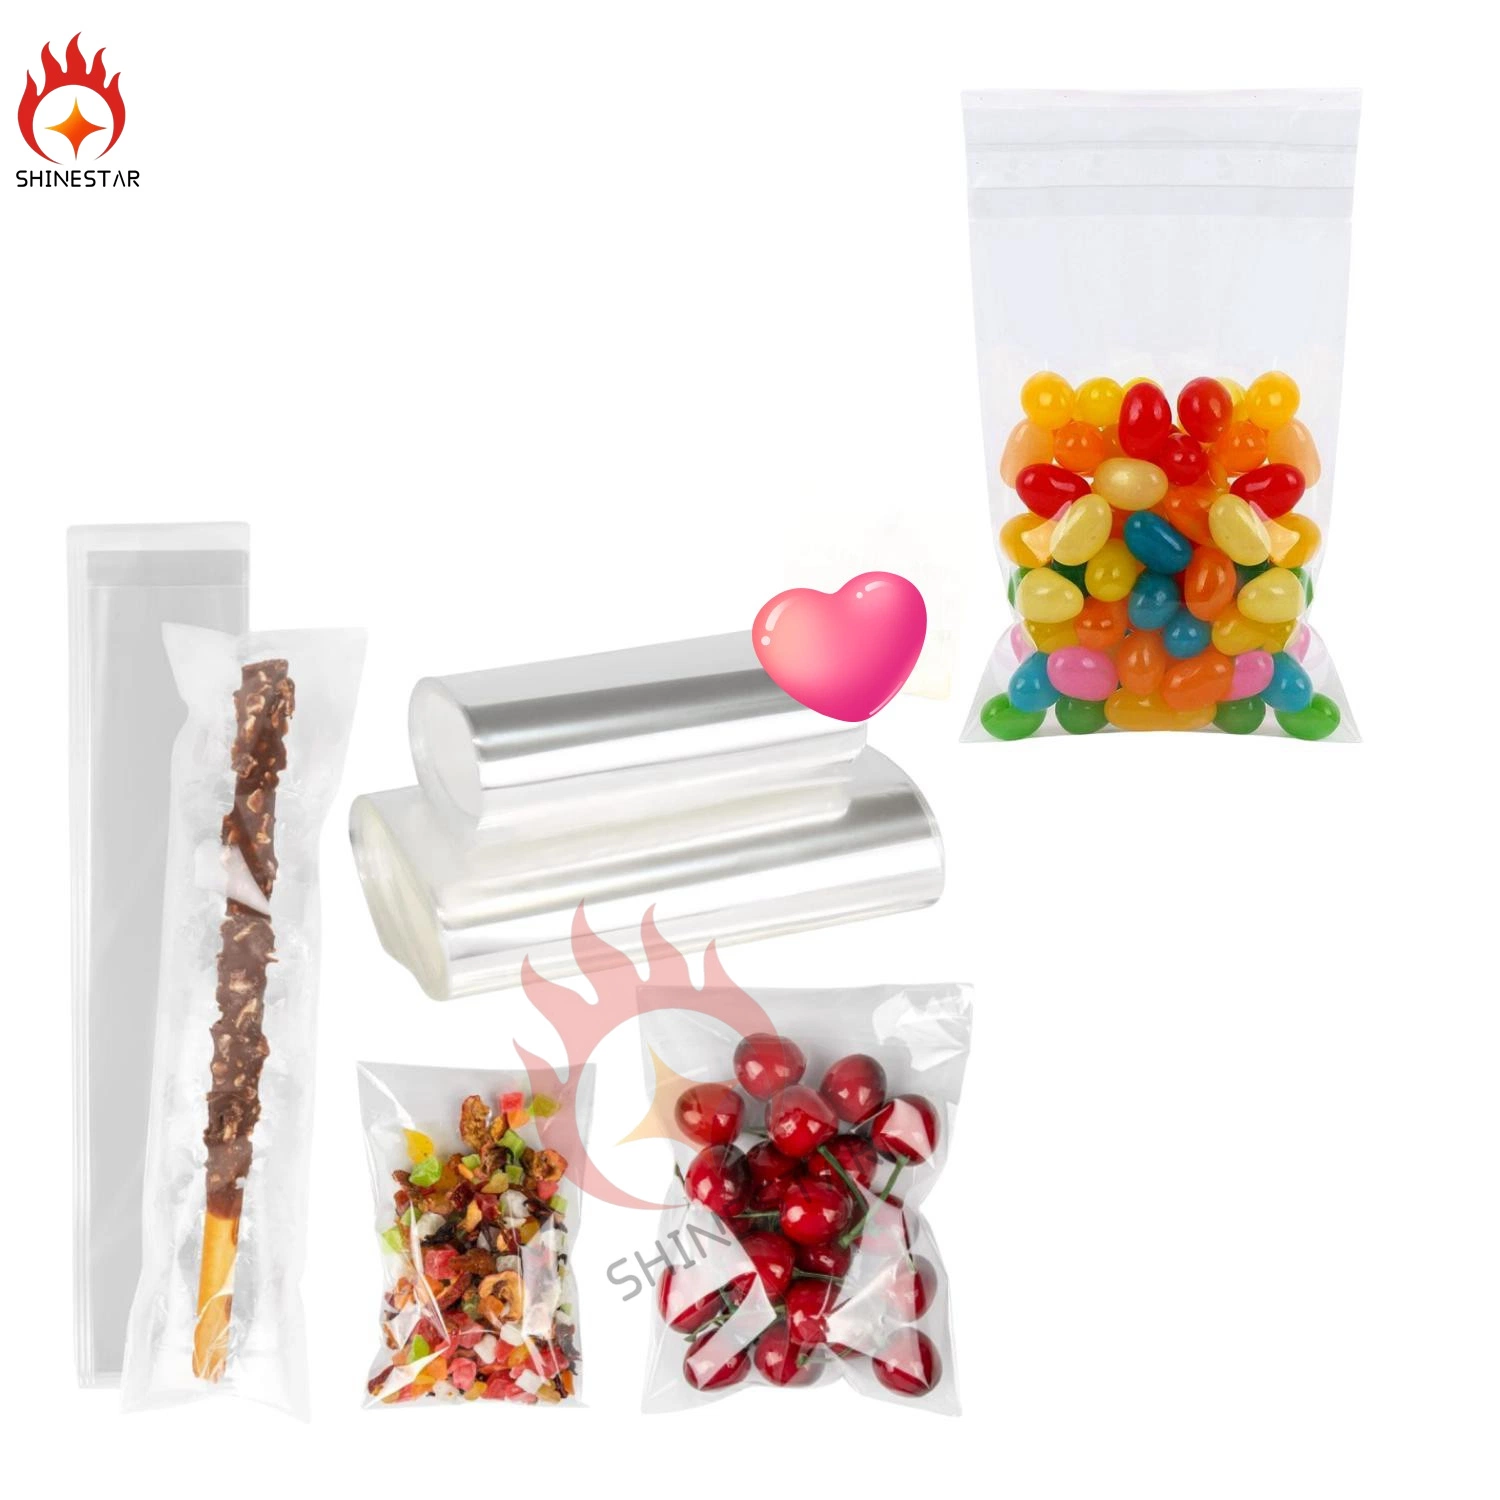 Self Sealing Cellophane Bags Clear Plastic Bags for Packaging Pretzel Cookie Candy Favor Gift Small Treat Bags Goodie Bags Cello Bag